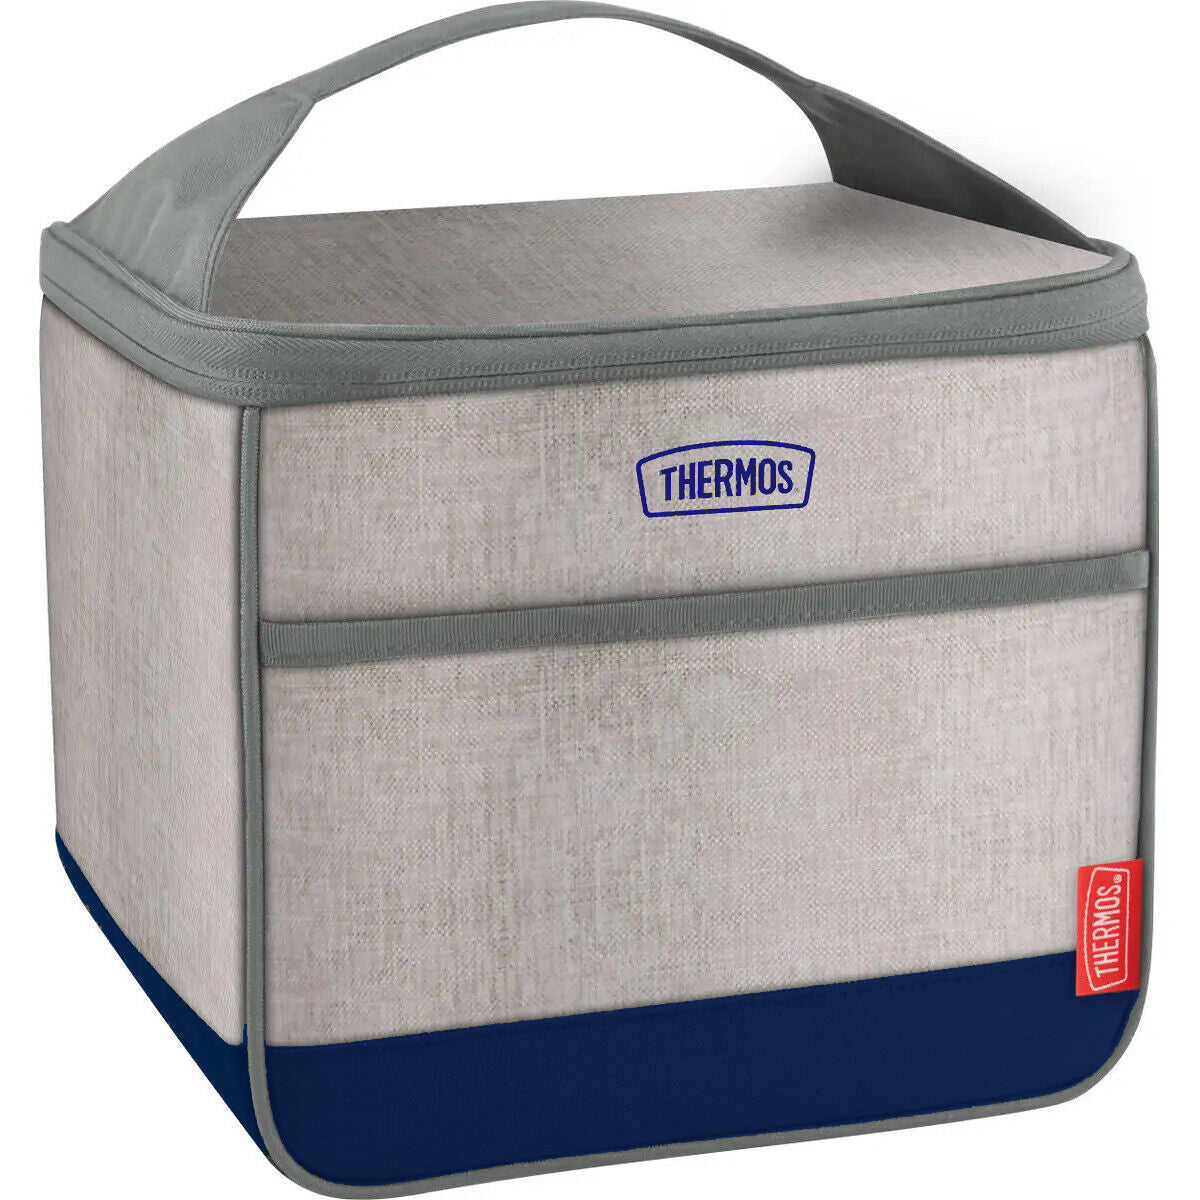 Thermos Adult Single Compartment Lunch Bag - Denim Thermos